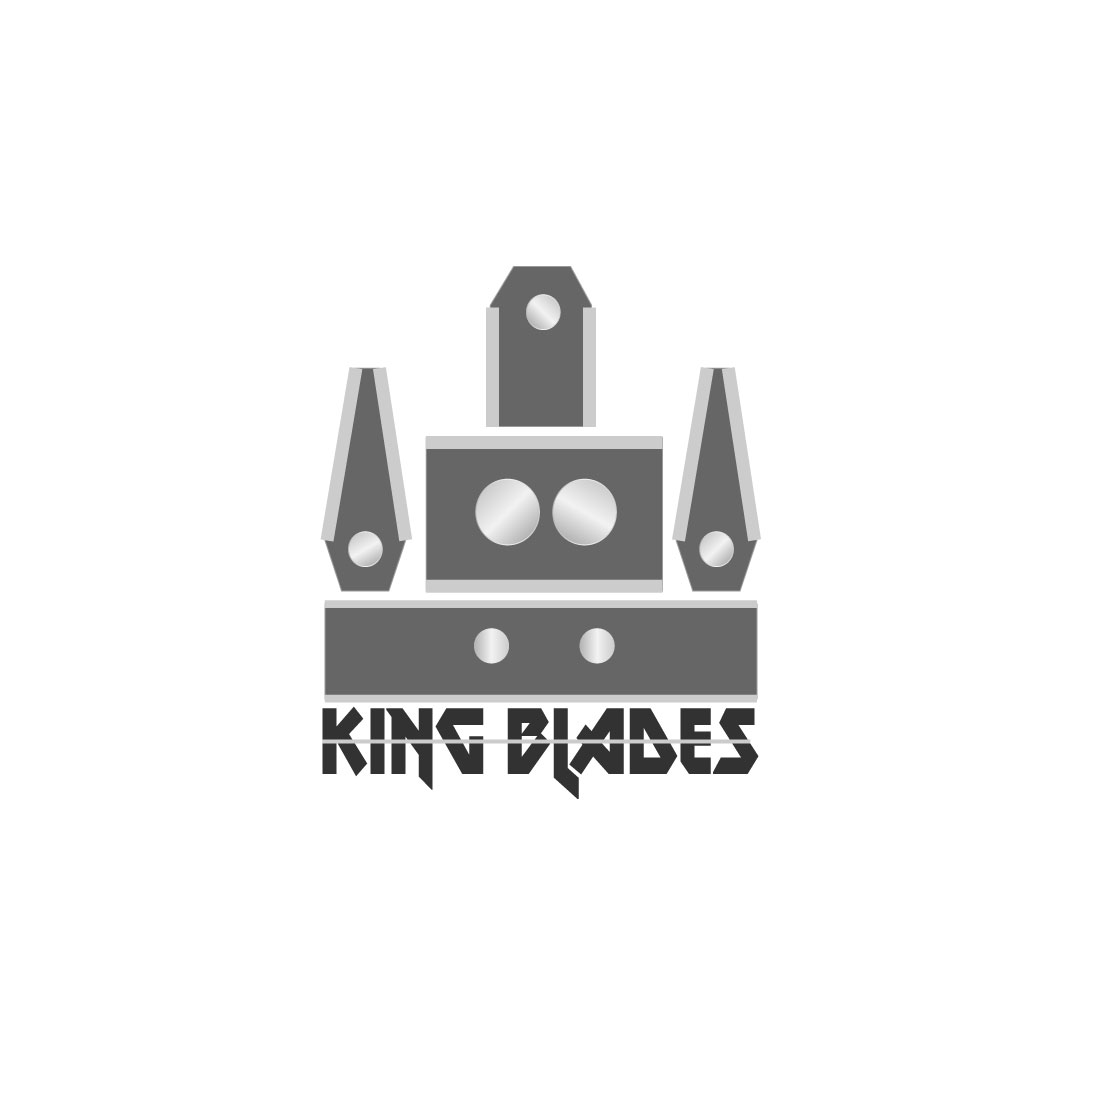 King Blades - TShirt Graphic Design preview image.